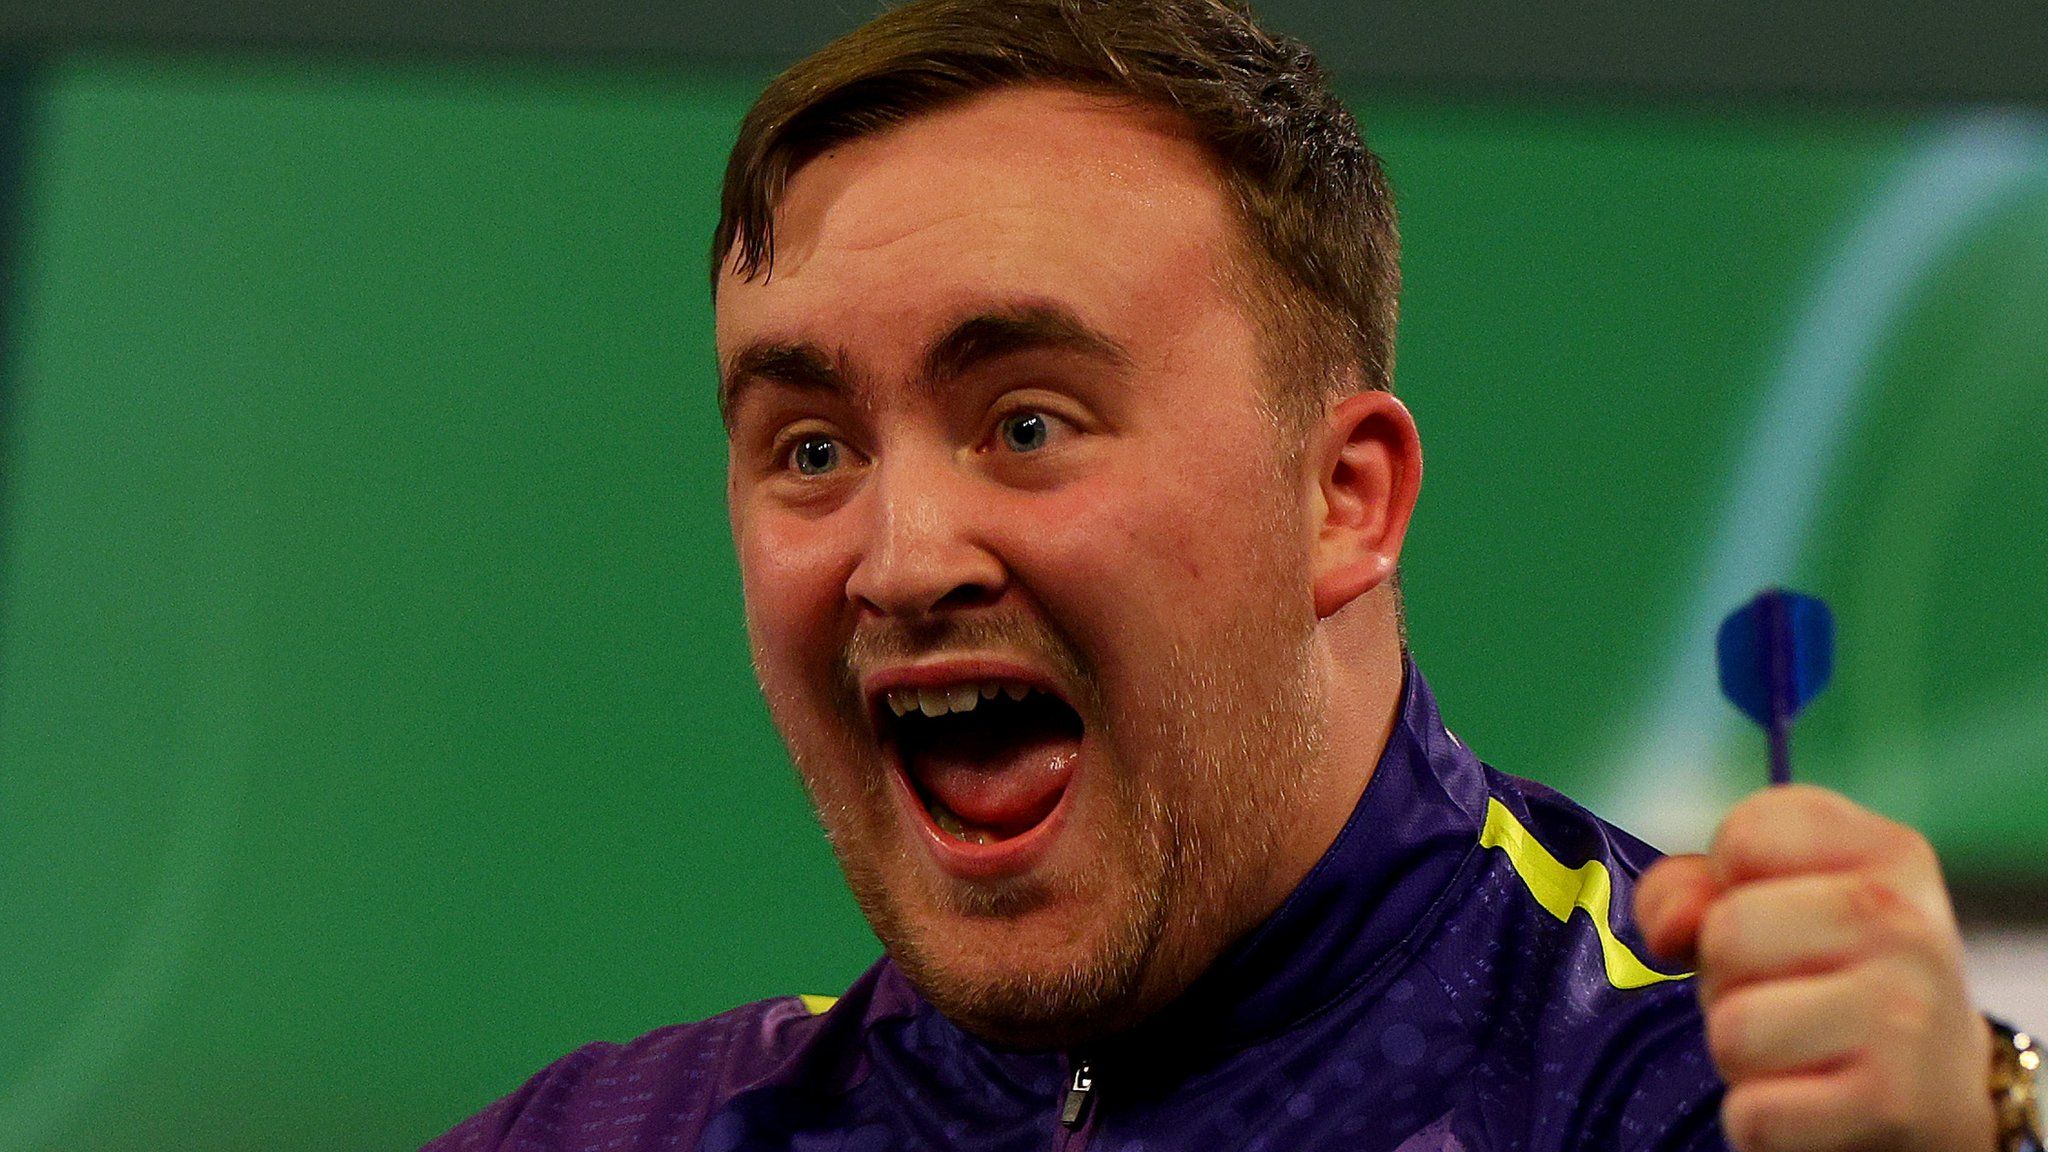 Luke Littler is just one match away from winning the PDC World Darts Championship at the age of 16